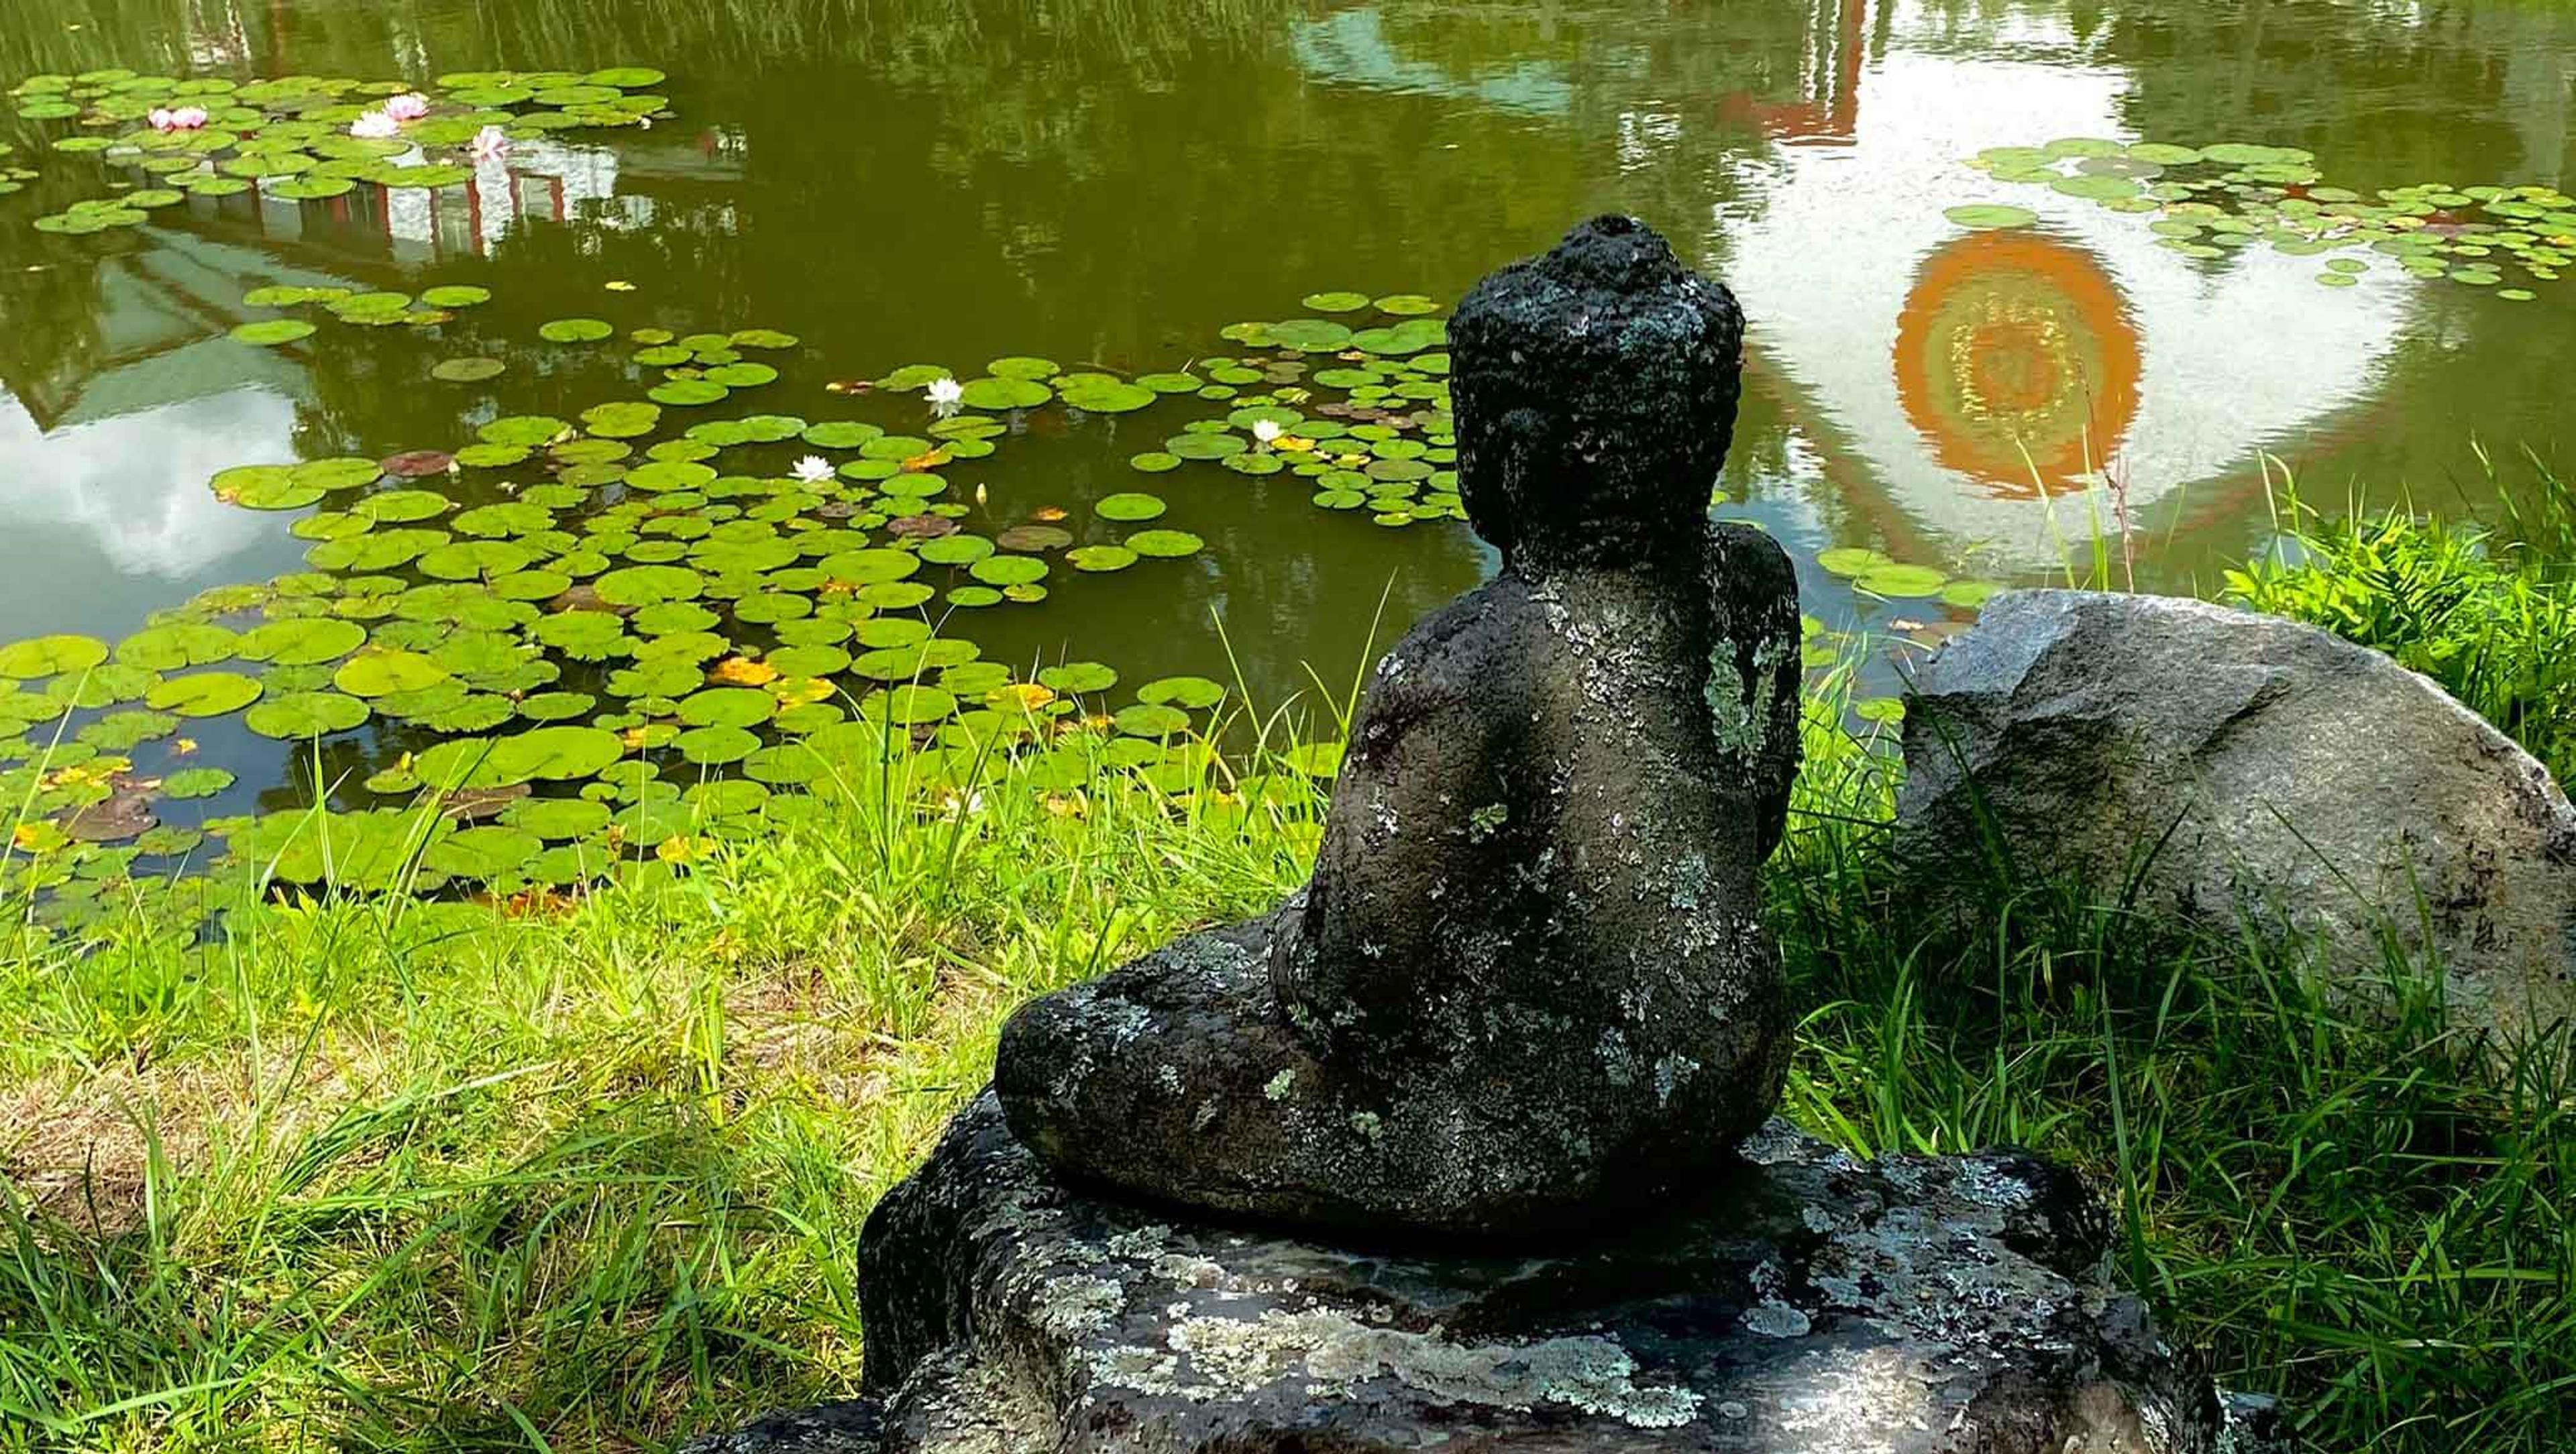 Introductory meditation programs and classes offered at Karme Choling Meditation Retreat Center